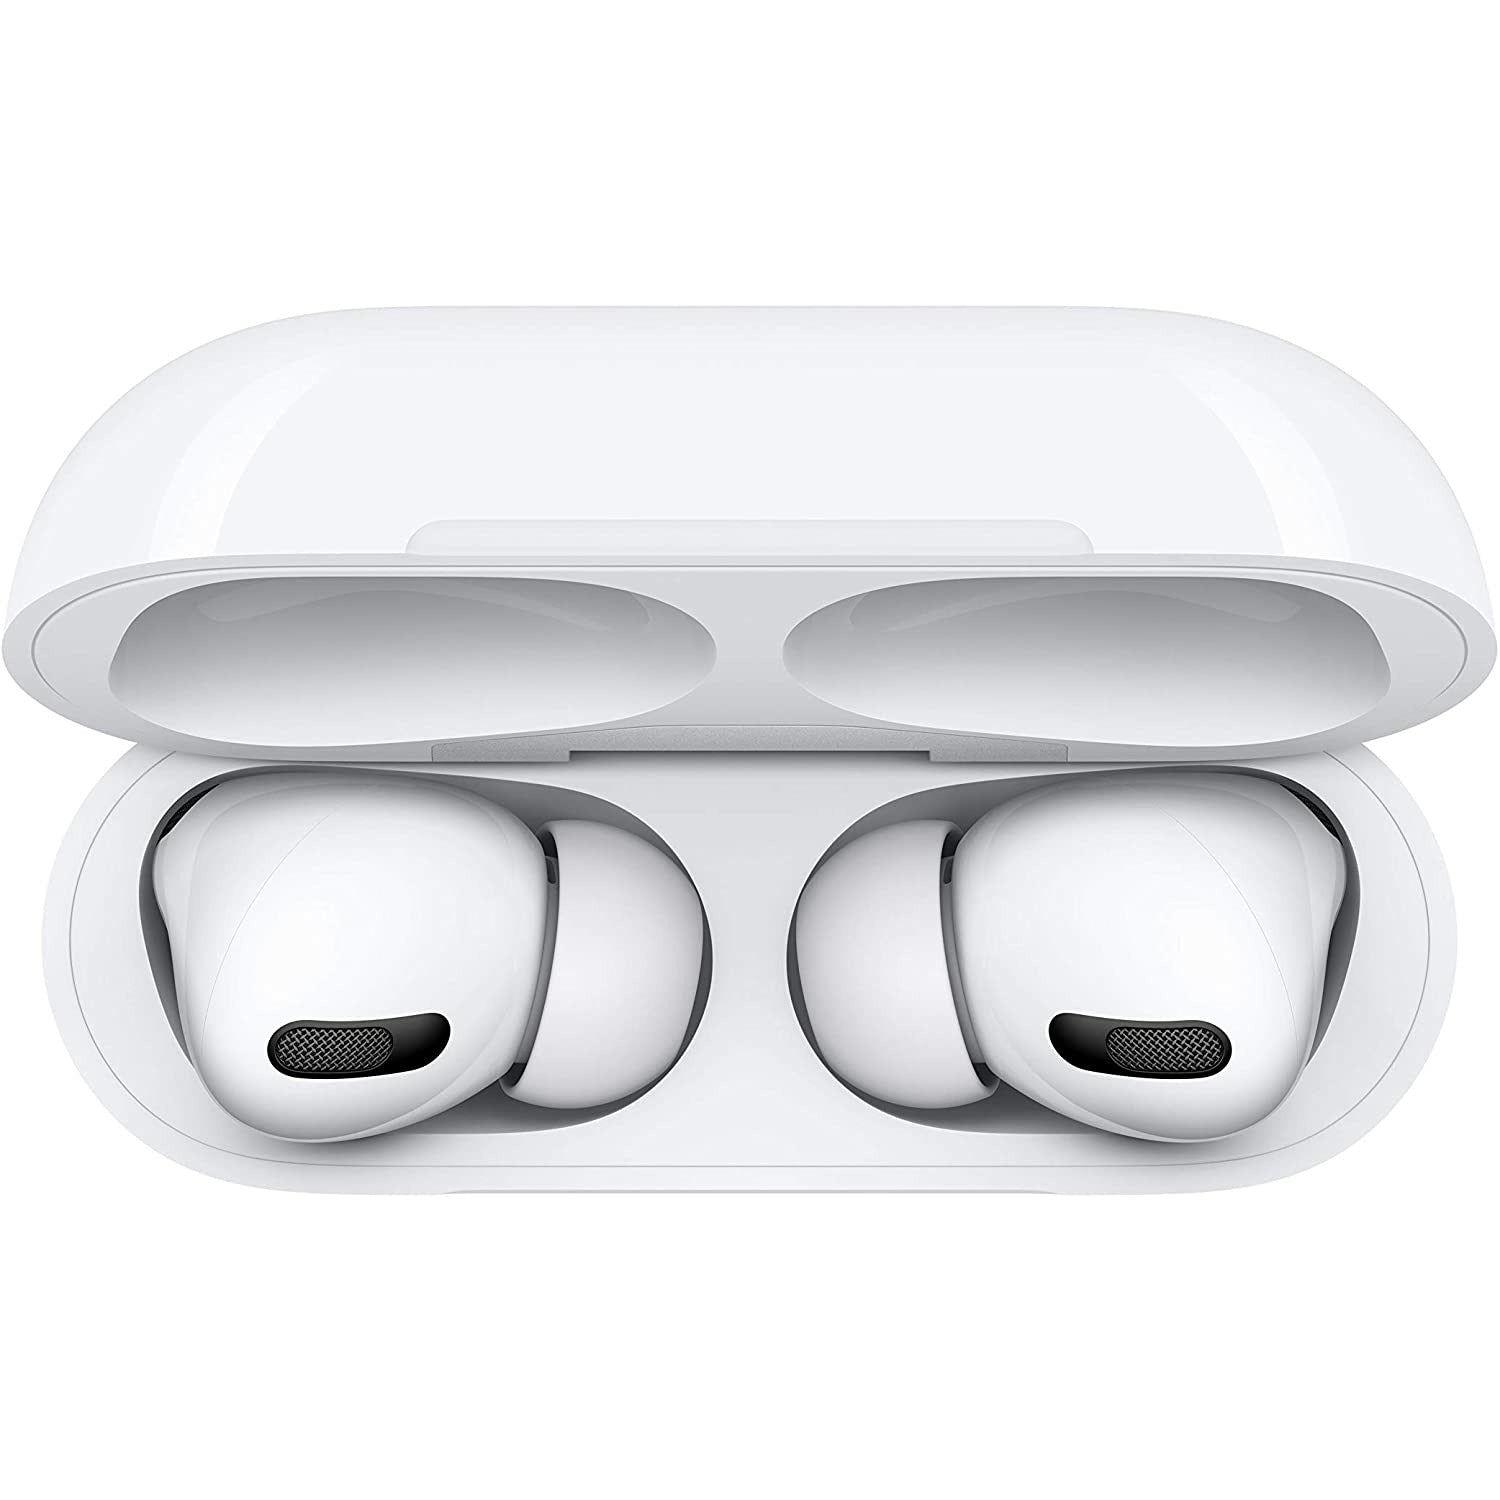 Apple AirPods Pro - Gshop Pty